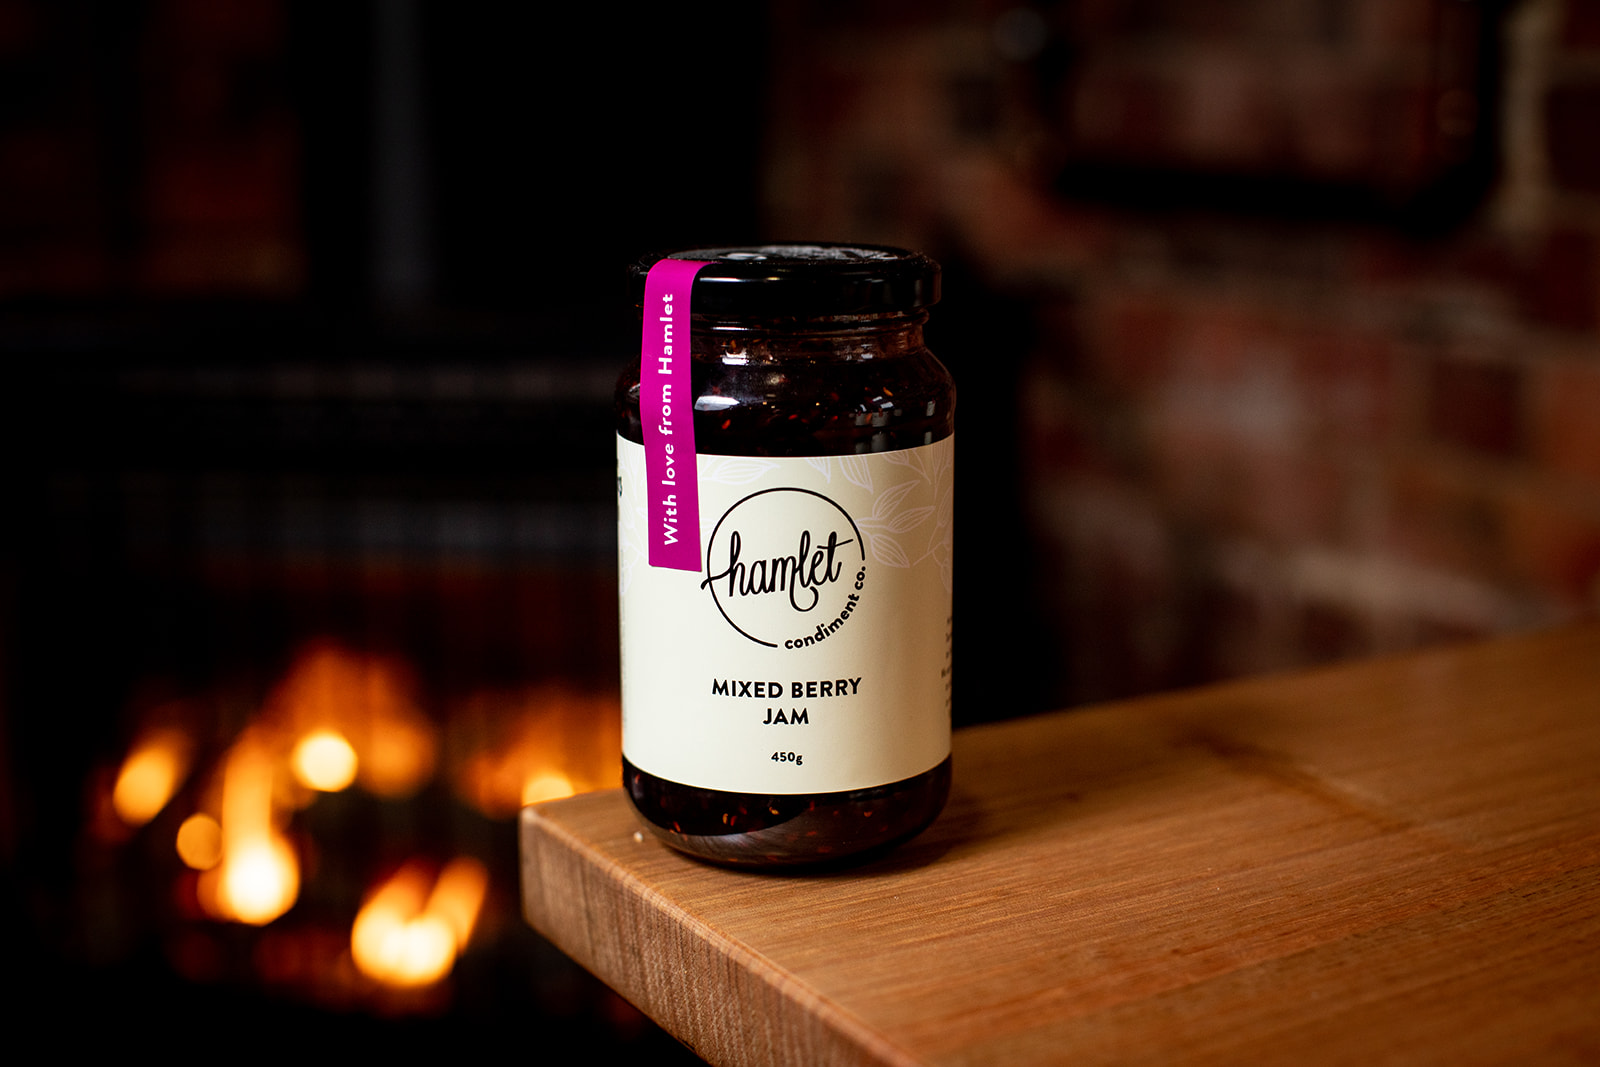 A jar of Hamlet's Mixed Berry Jam sitting on a timber table.